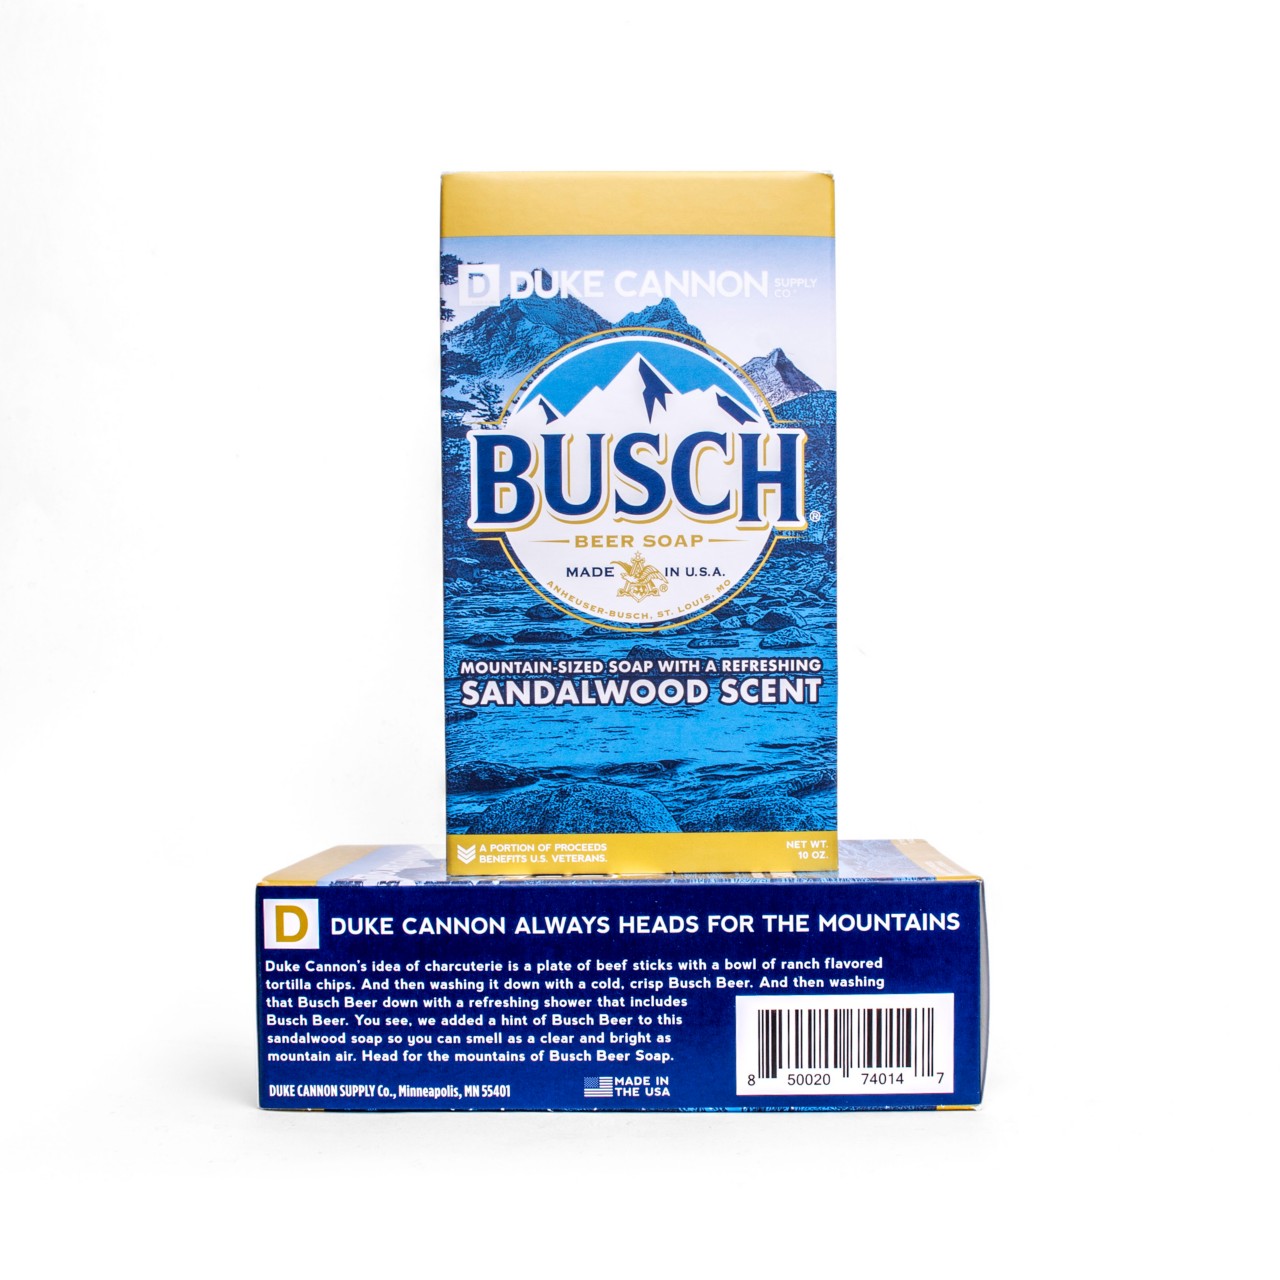 Image links to Busch beer soap.